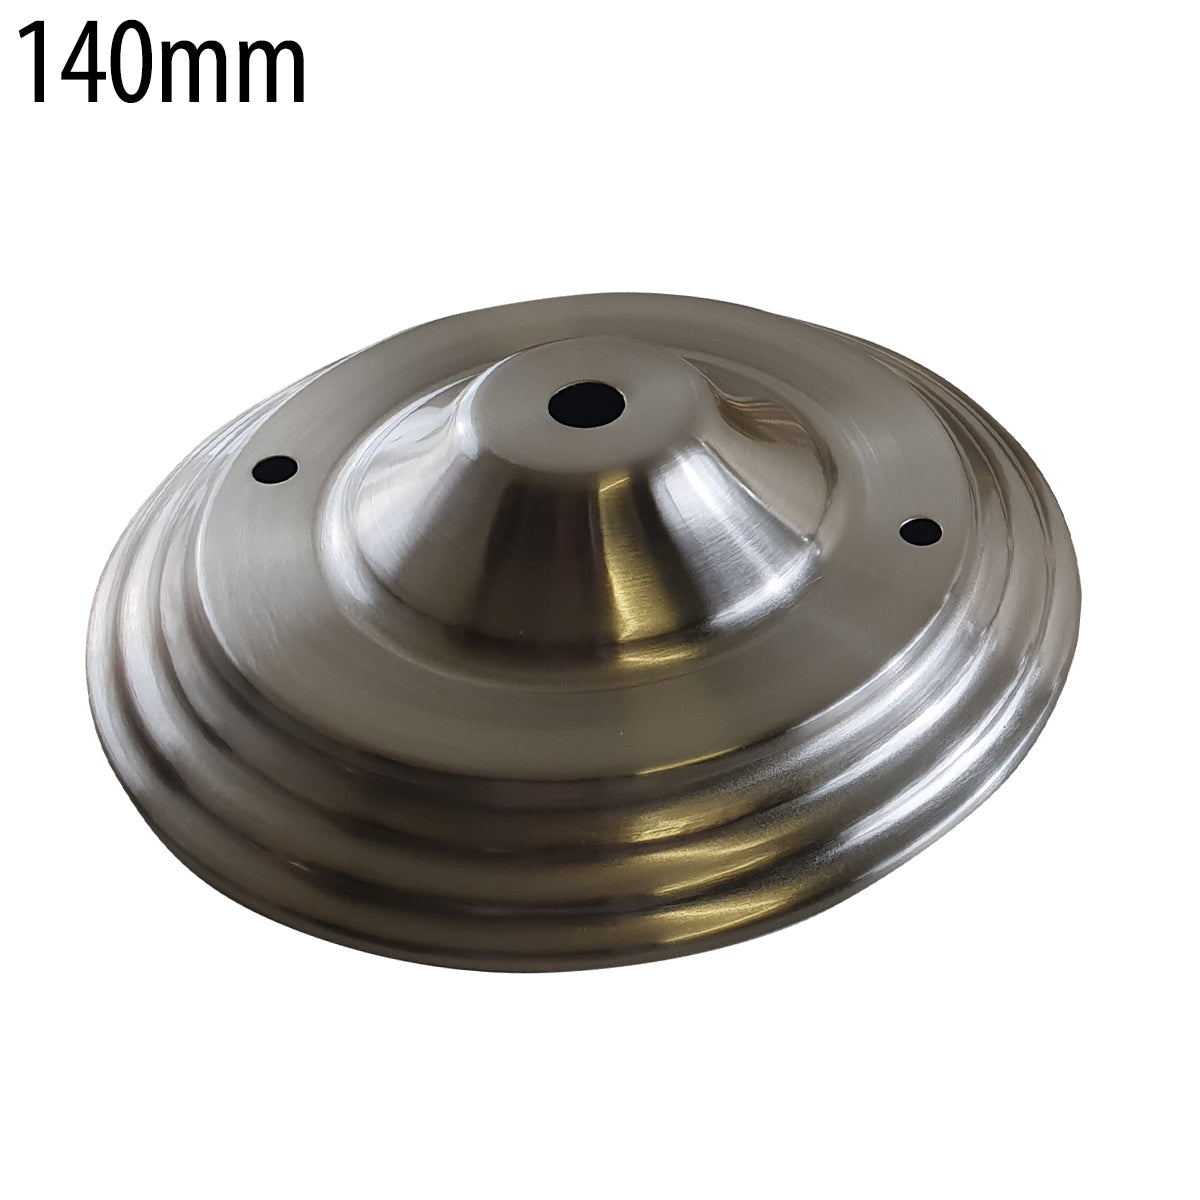  Outlet Drop Metal Front Fitting Ceiling Rose